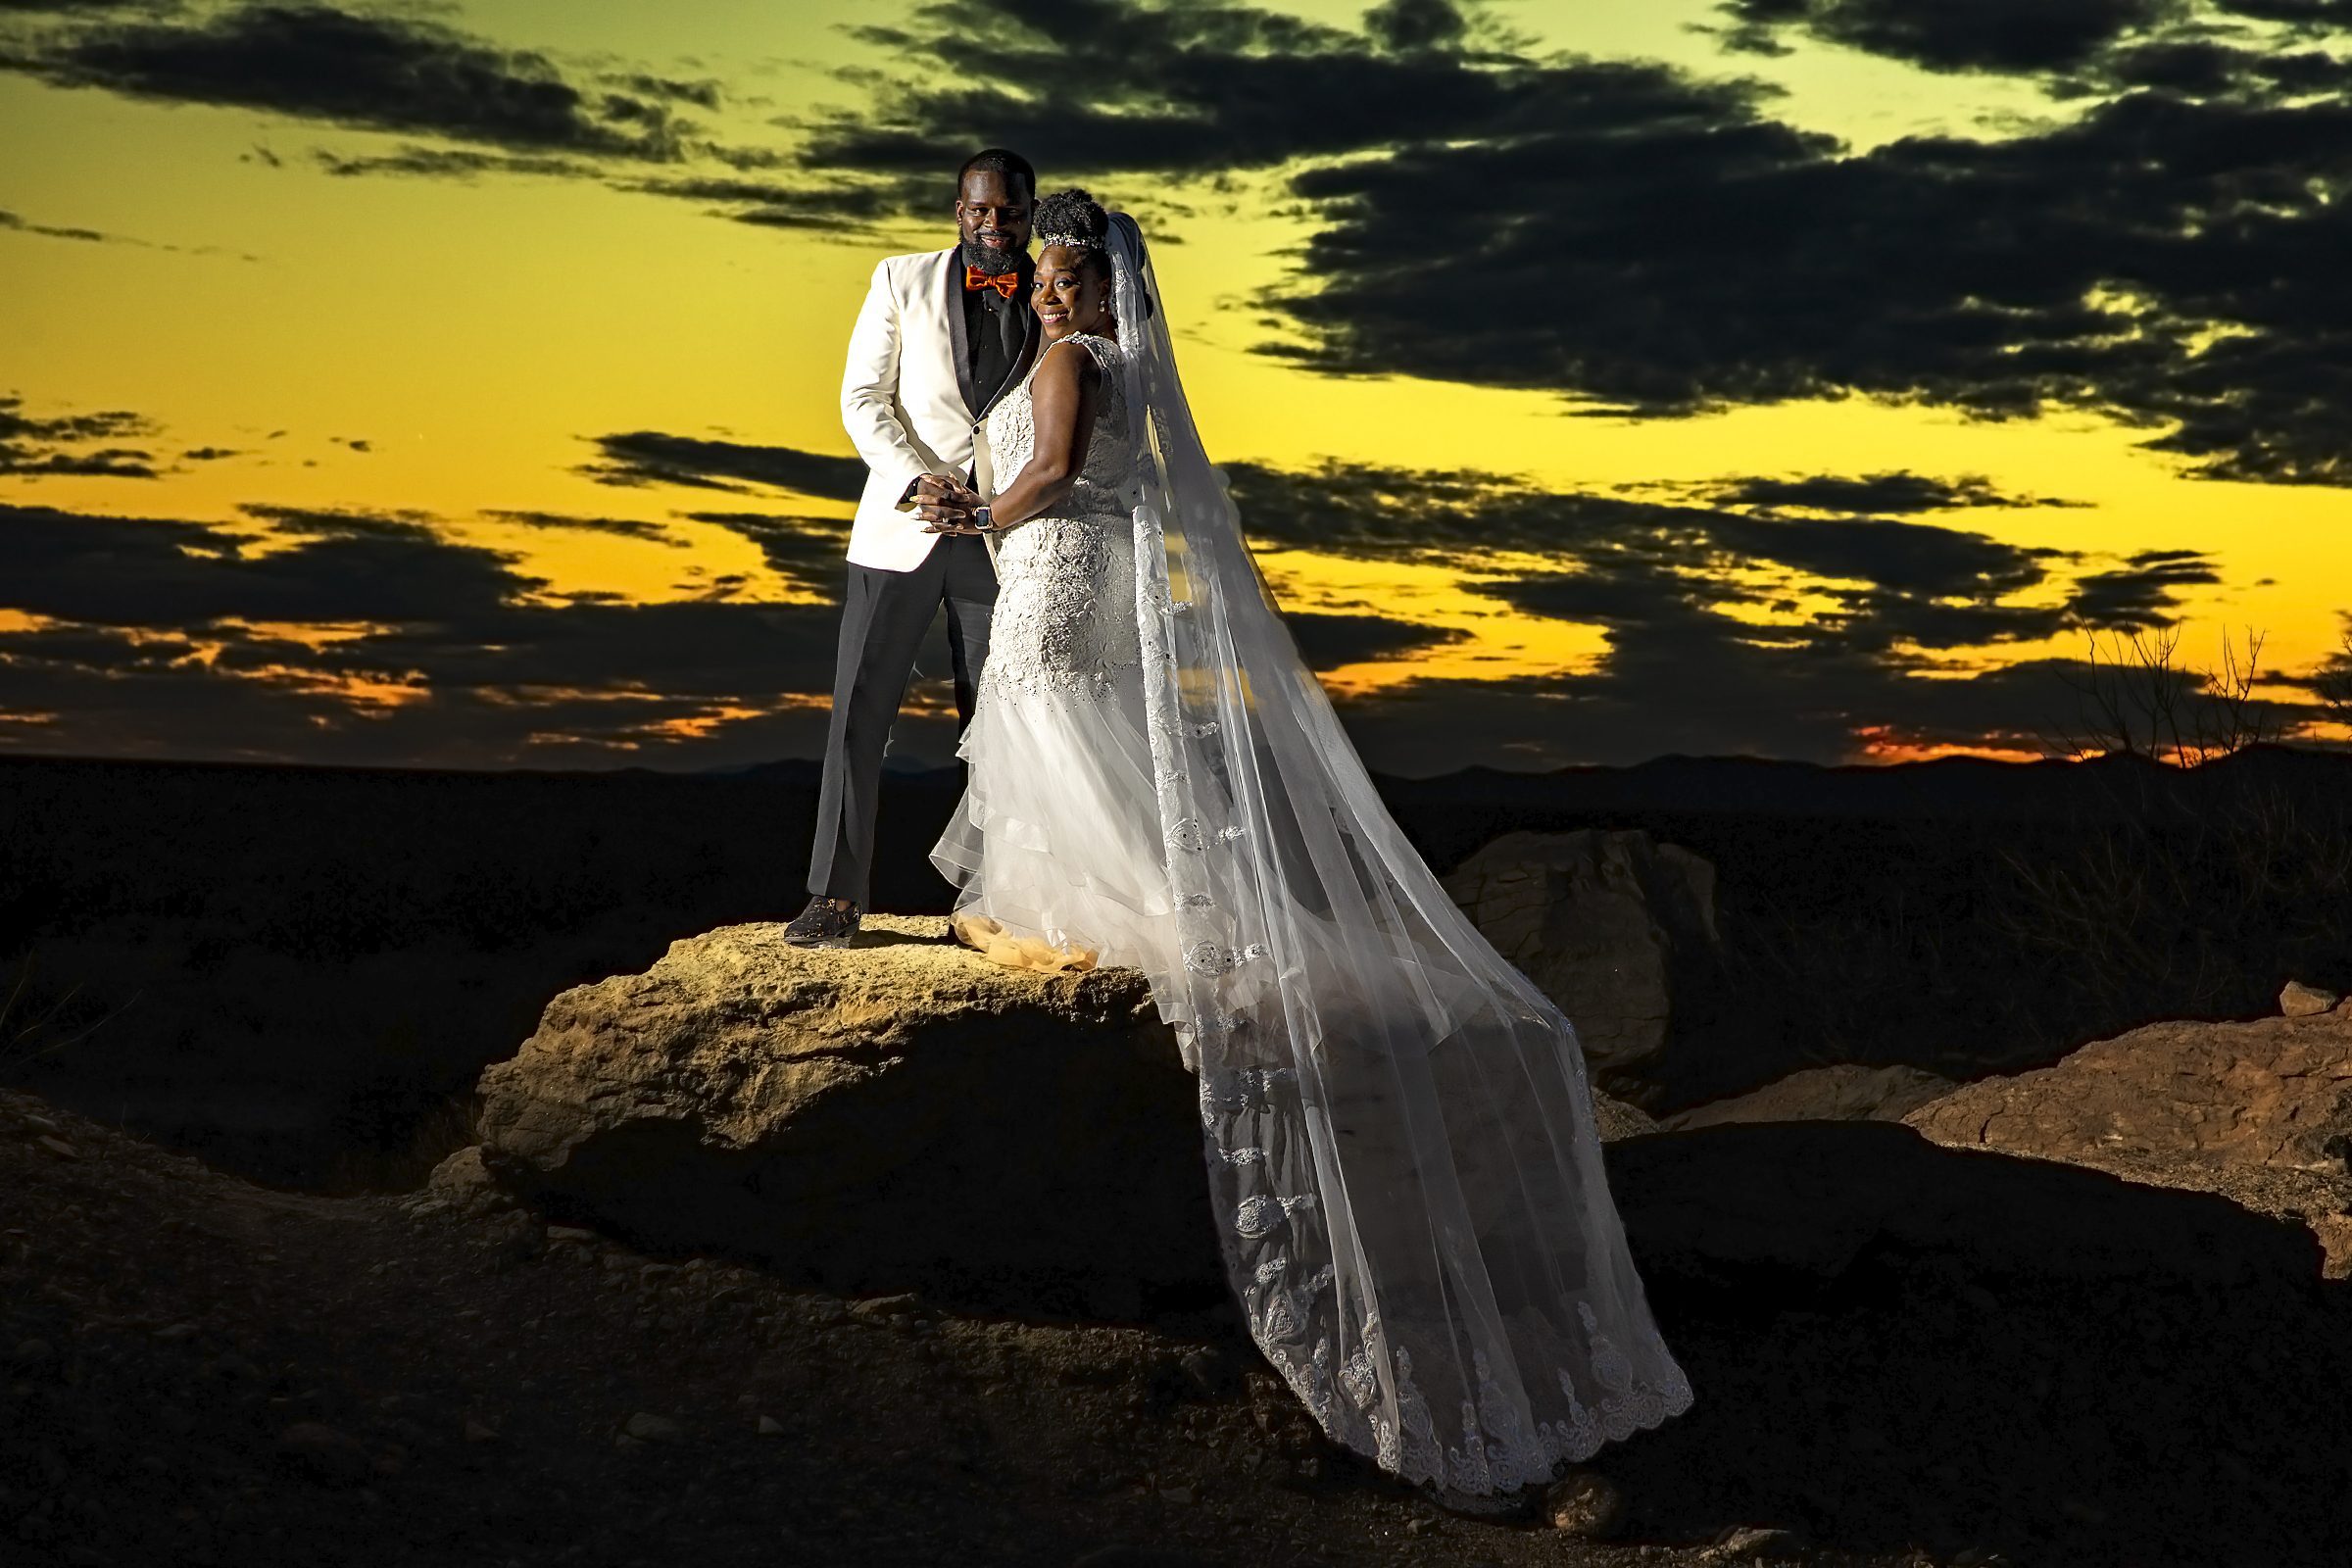 A bride and groom at Valley of Fire, capturing stunning wedding photos against a sunset backdrop on a rock.